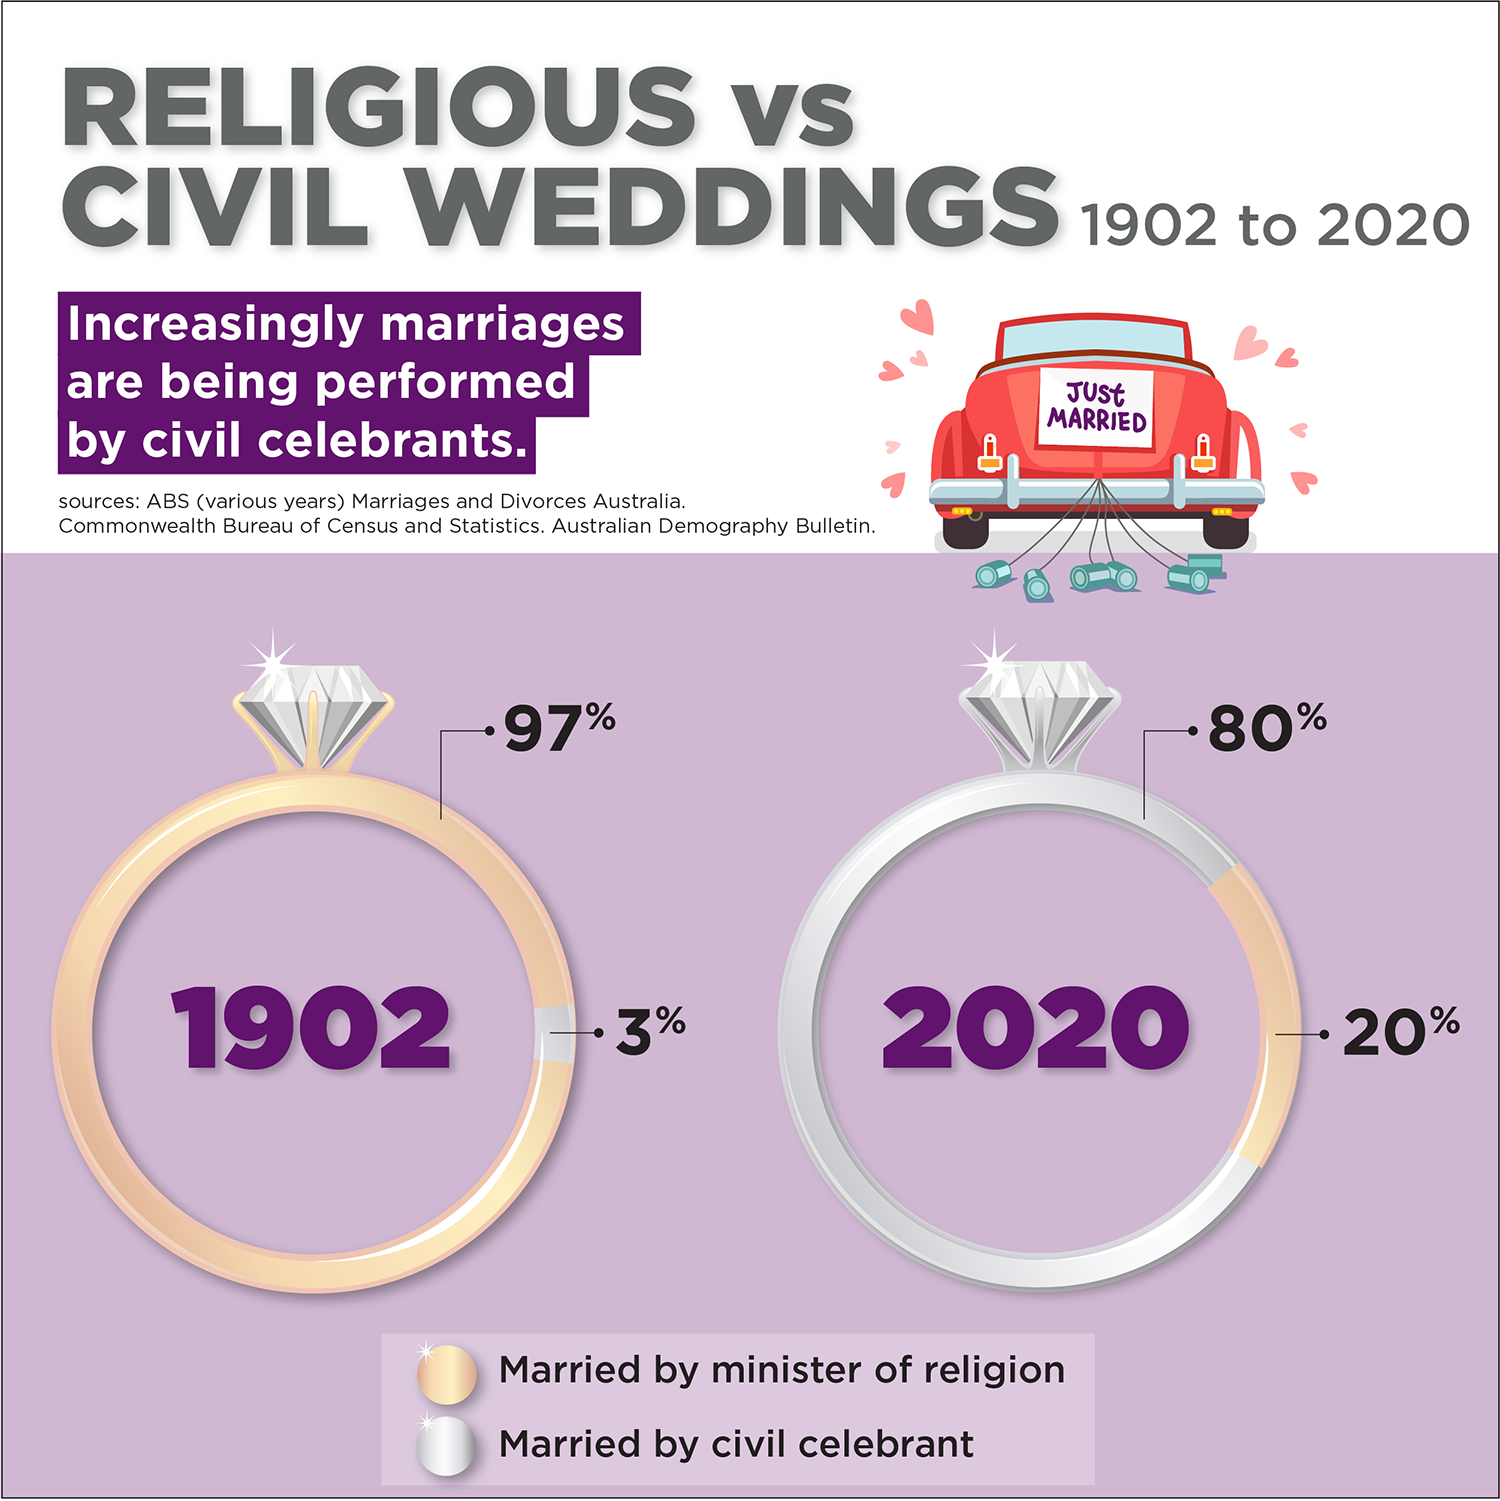 Infographic: Religious vs civil weddings 1902-2020: Increasingly marriages are being performed by civil celebrants. 1902-97% married by minister of religion, 3% married by civil celebrant; 2020-80% married by minister of religion, 20% married by celebrant